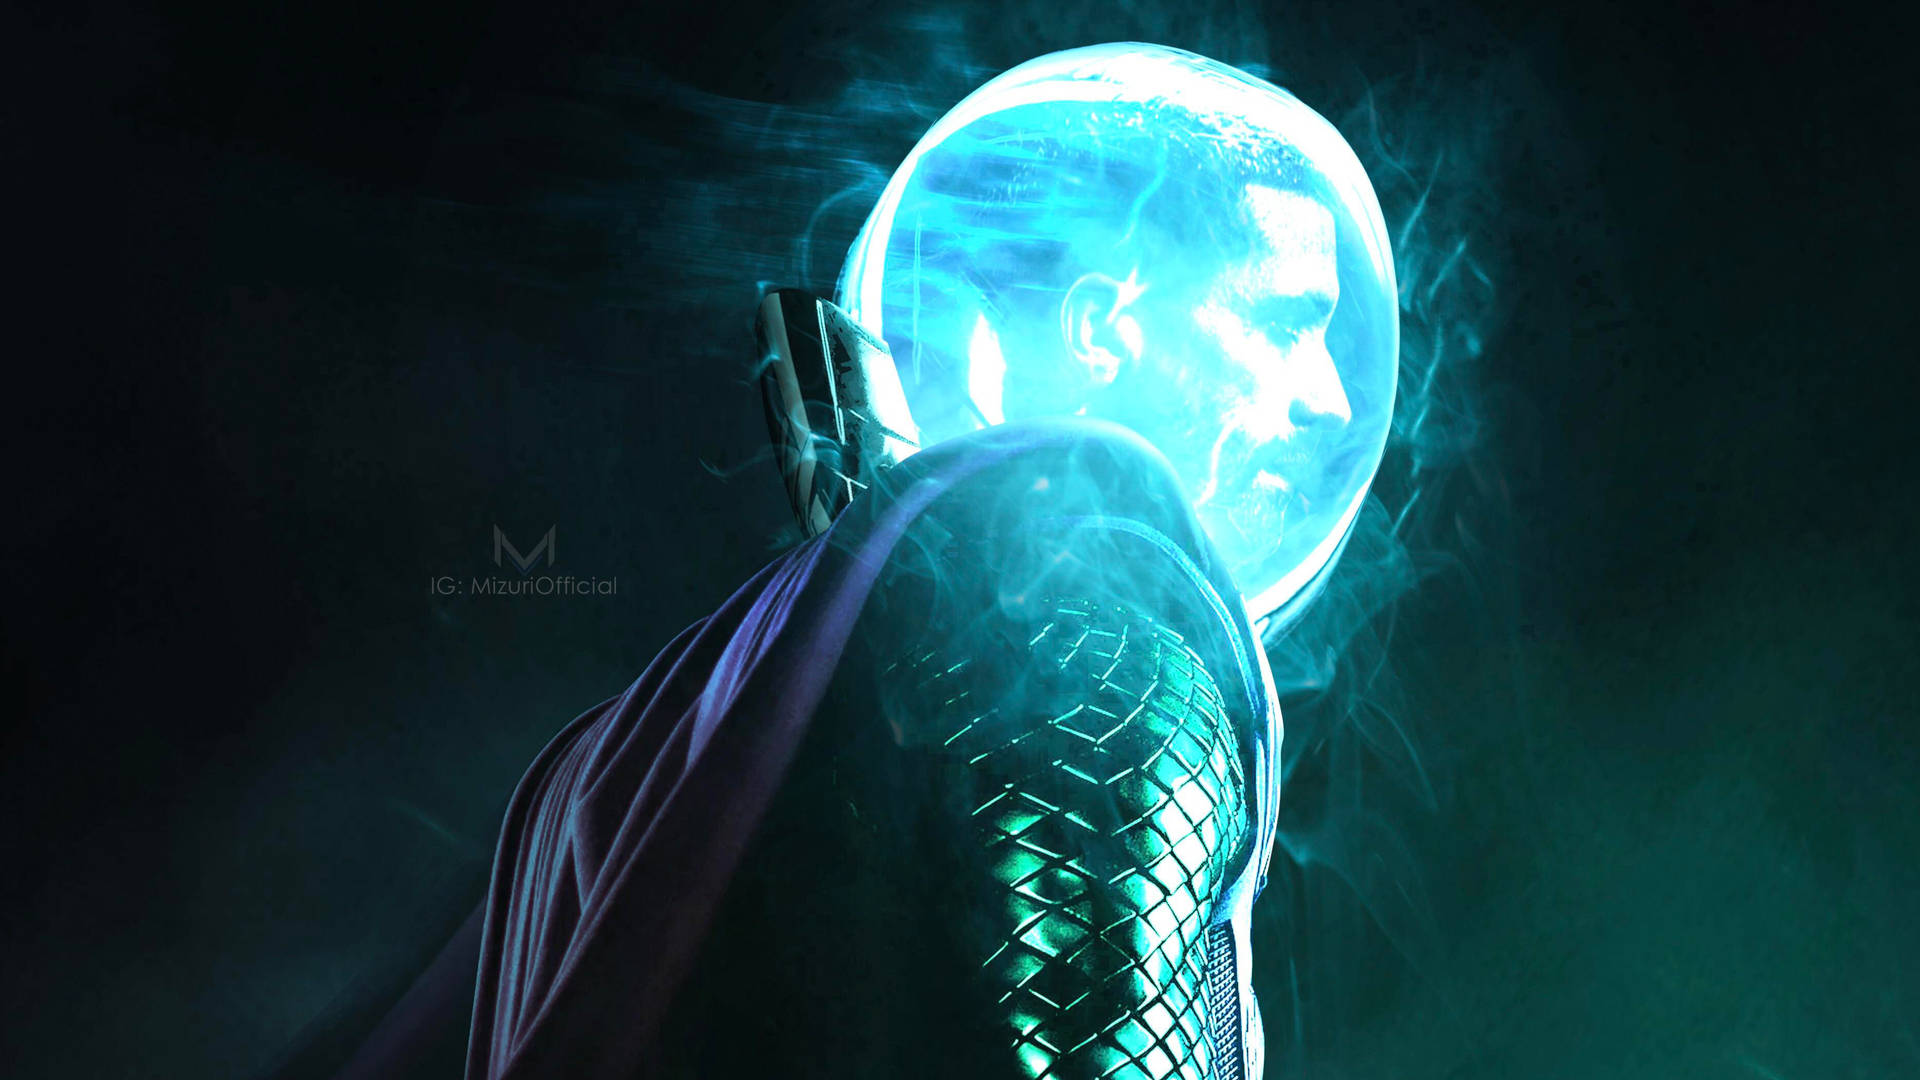 Mysterio In Action Wallpaper